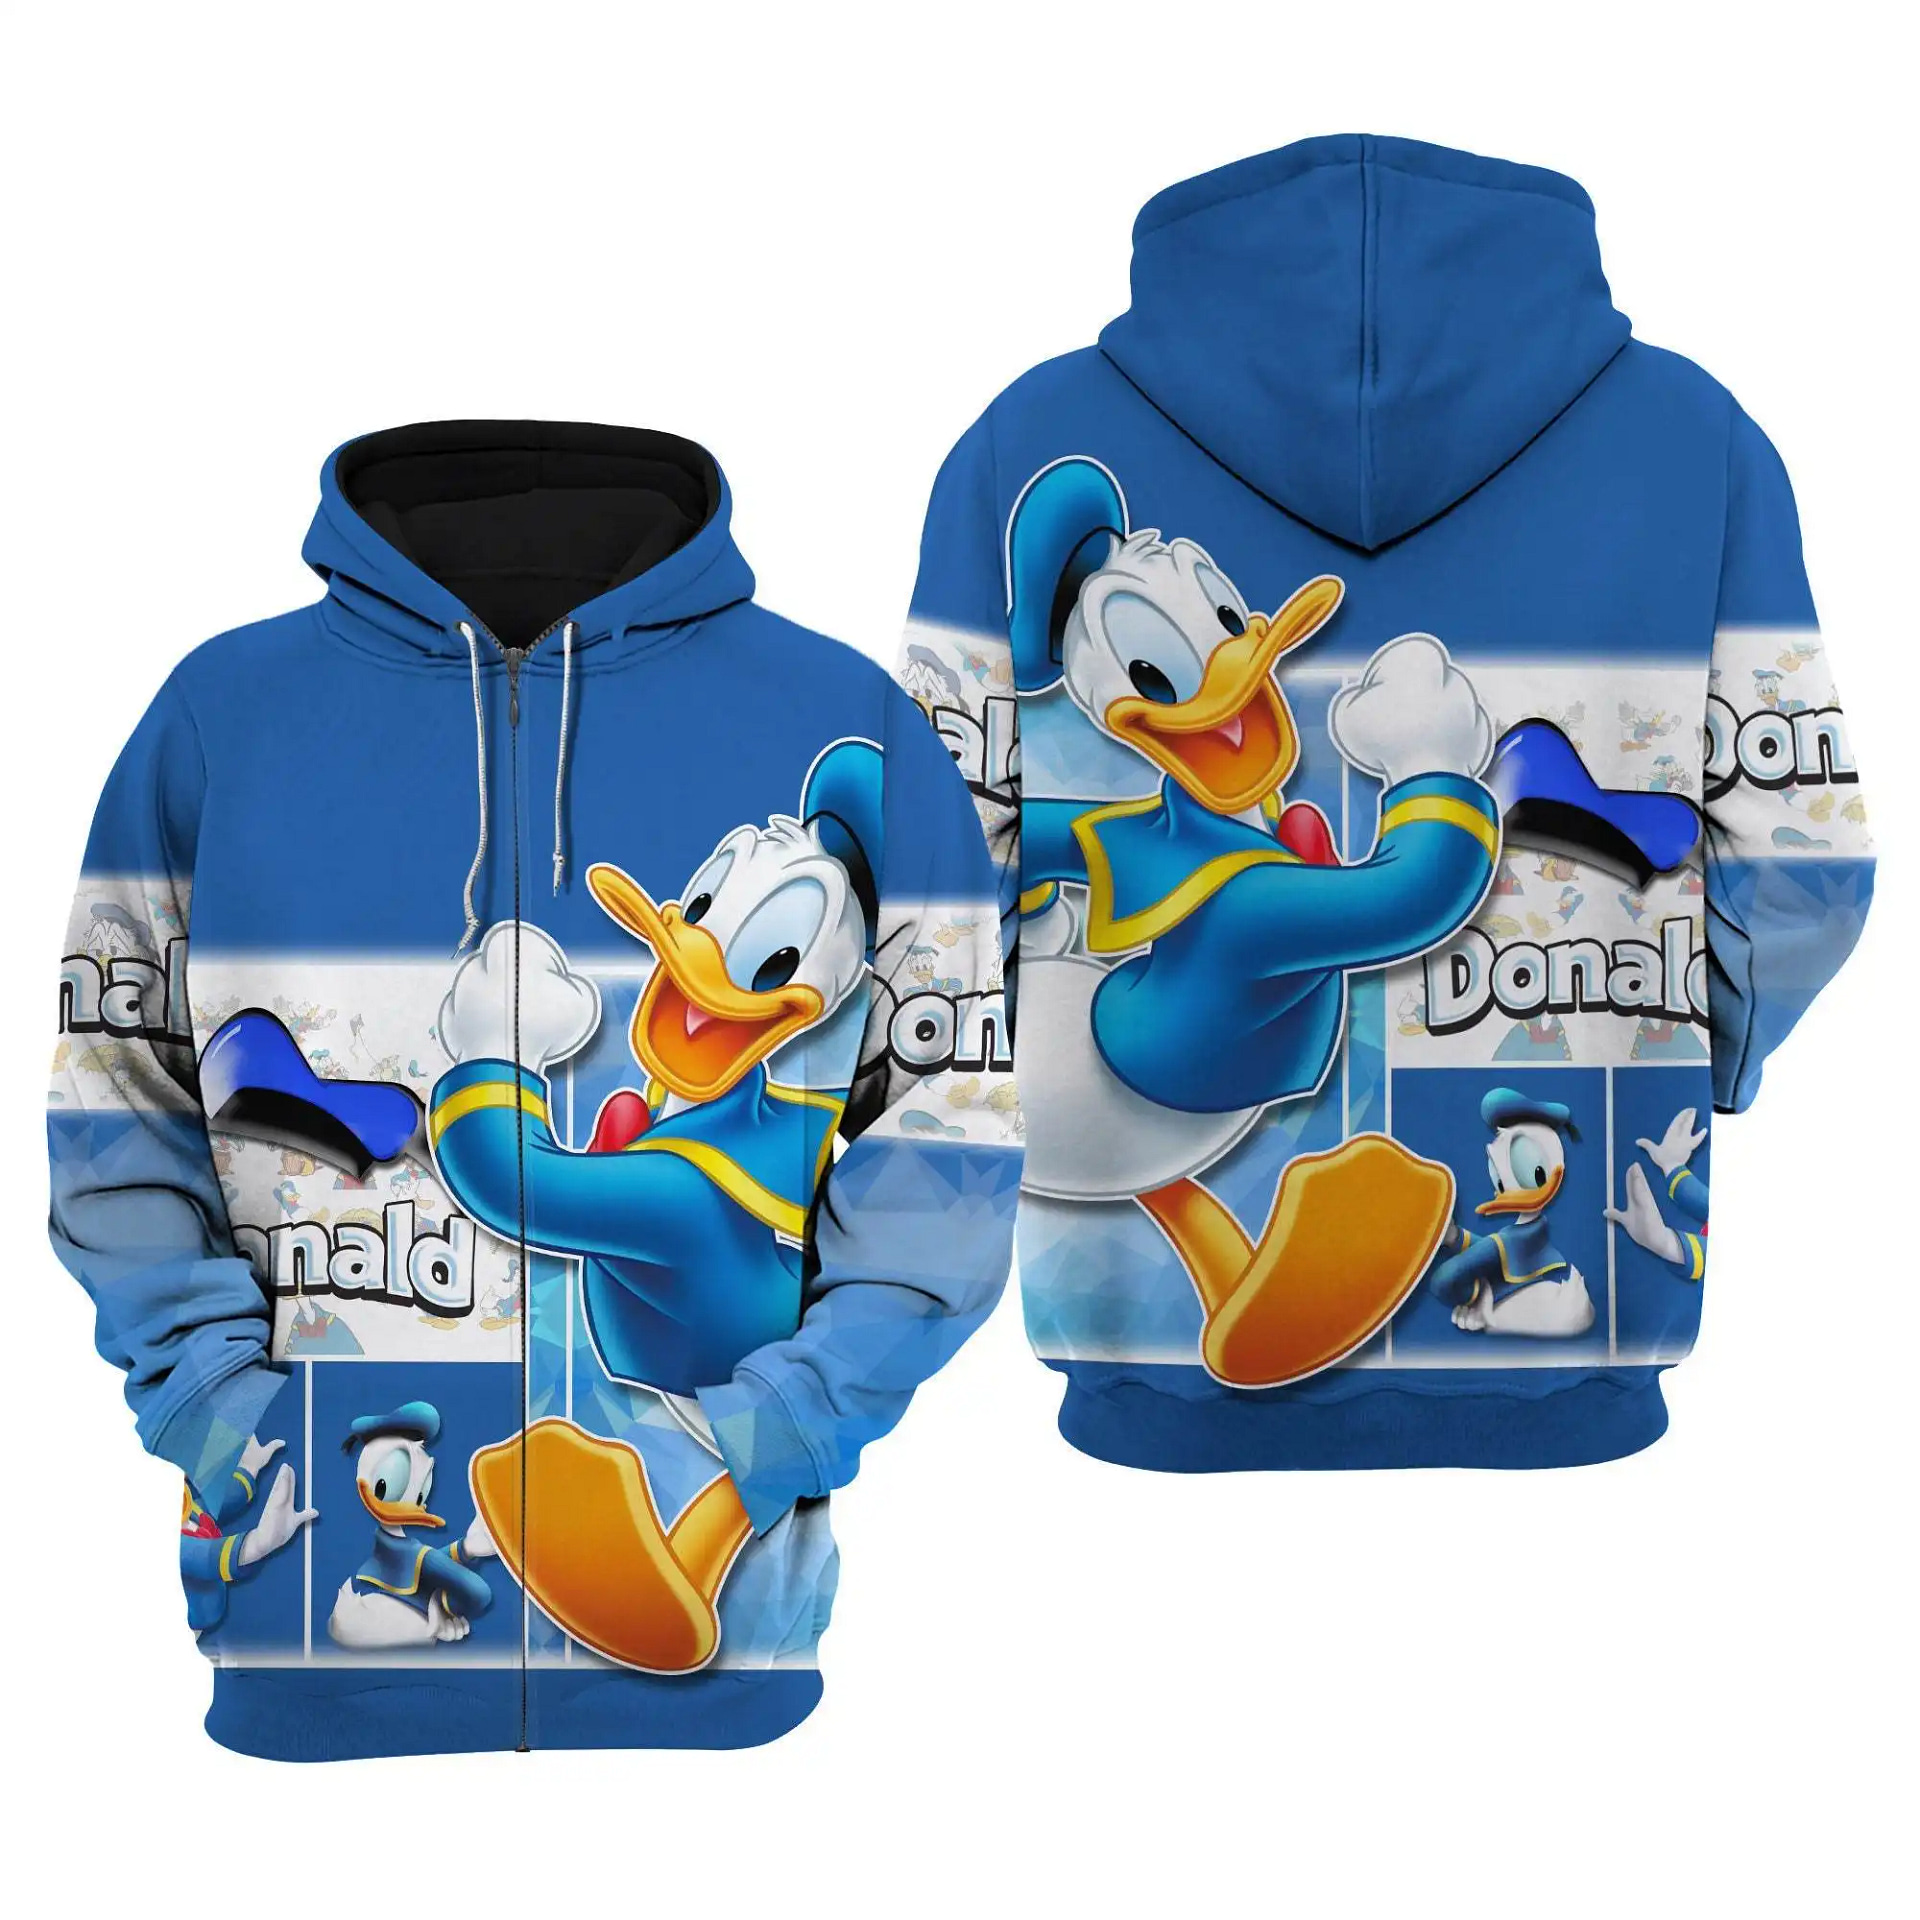 Blue Funny Donald Duck Disney Disney Graphic Cartoon Outfits Clothing Men Women Kids Toddlers Hoodie 3D